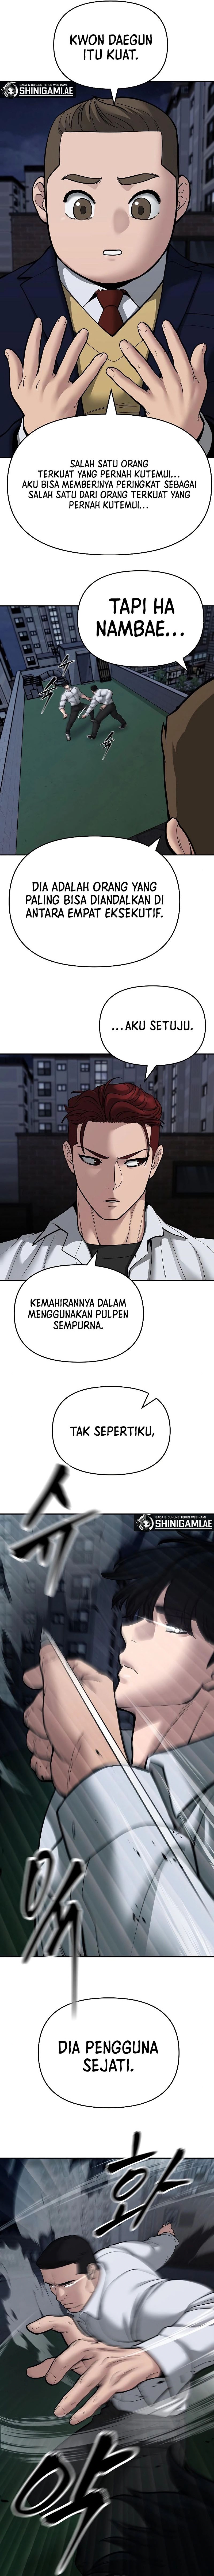 the-bully-in-charge Chapter 72